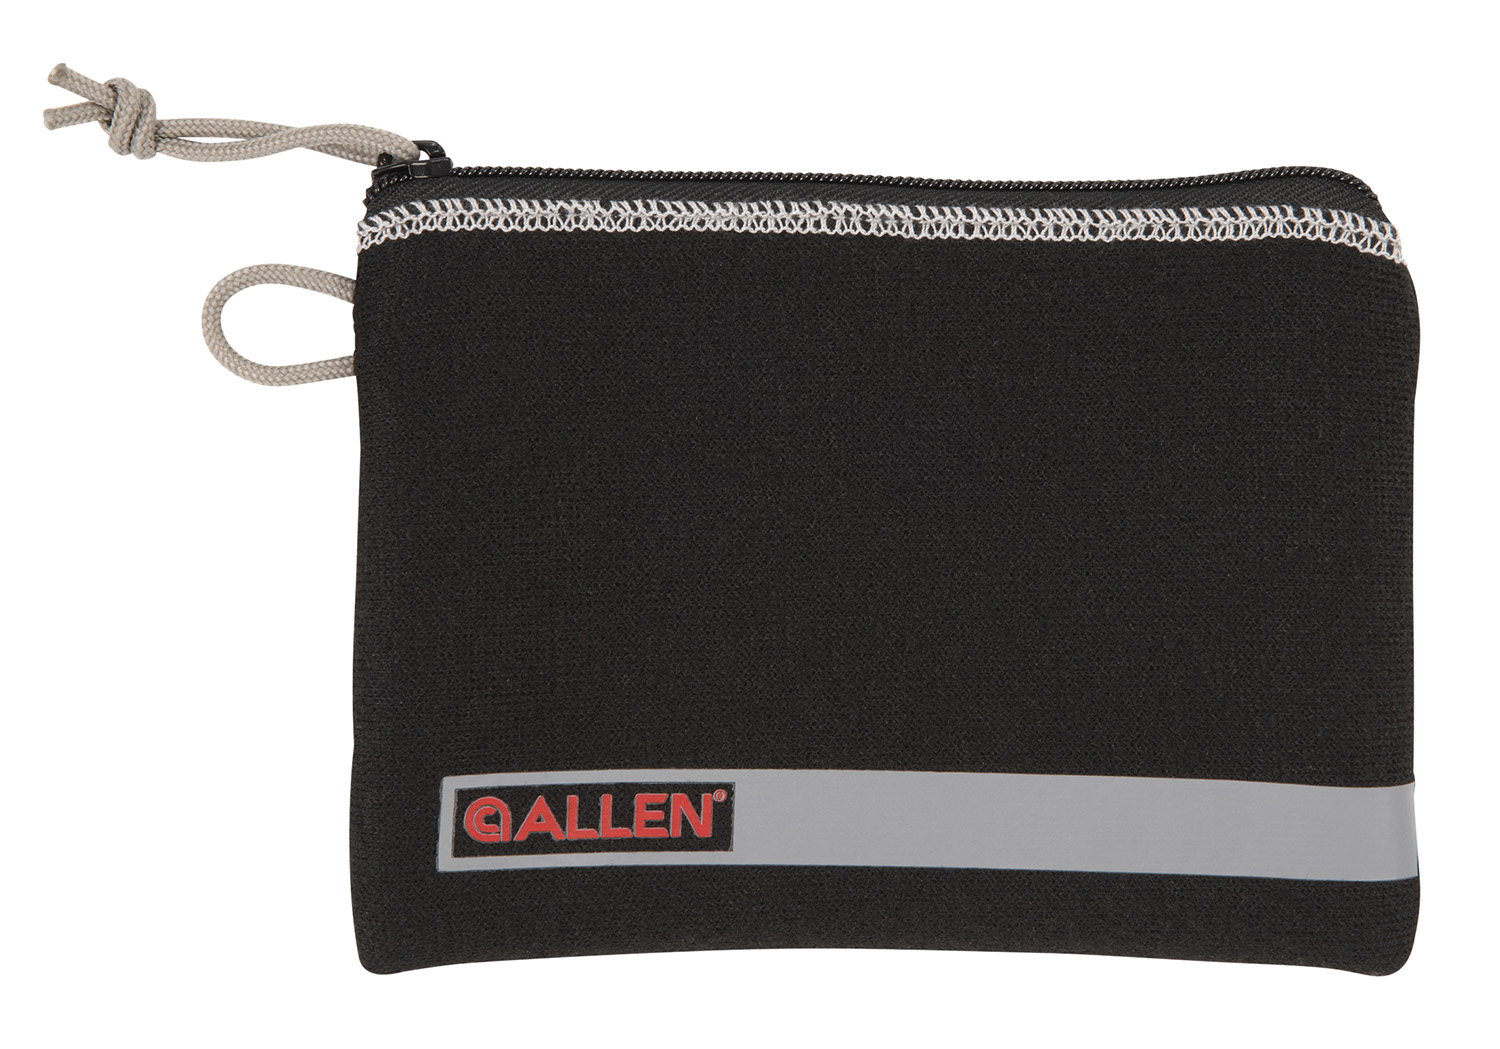 Allen 3626 Pistol Pouch  made of Black Polyester with Lockable Zippers, ID Label & Fleece Lining Holds Compact Size Handgun 5